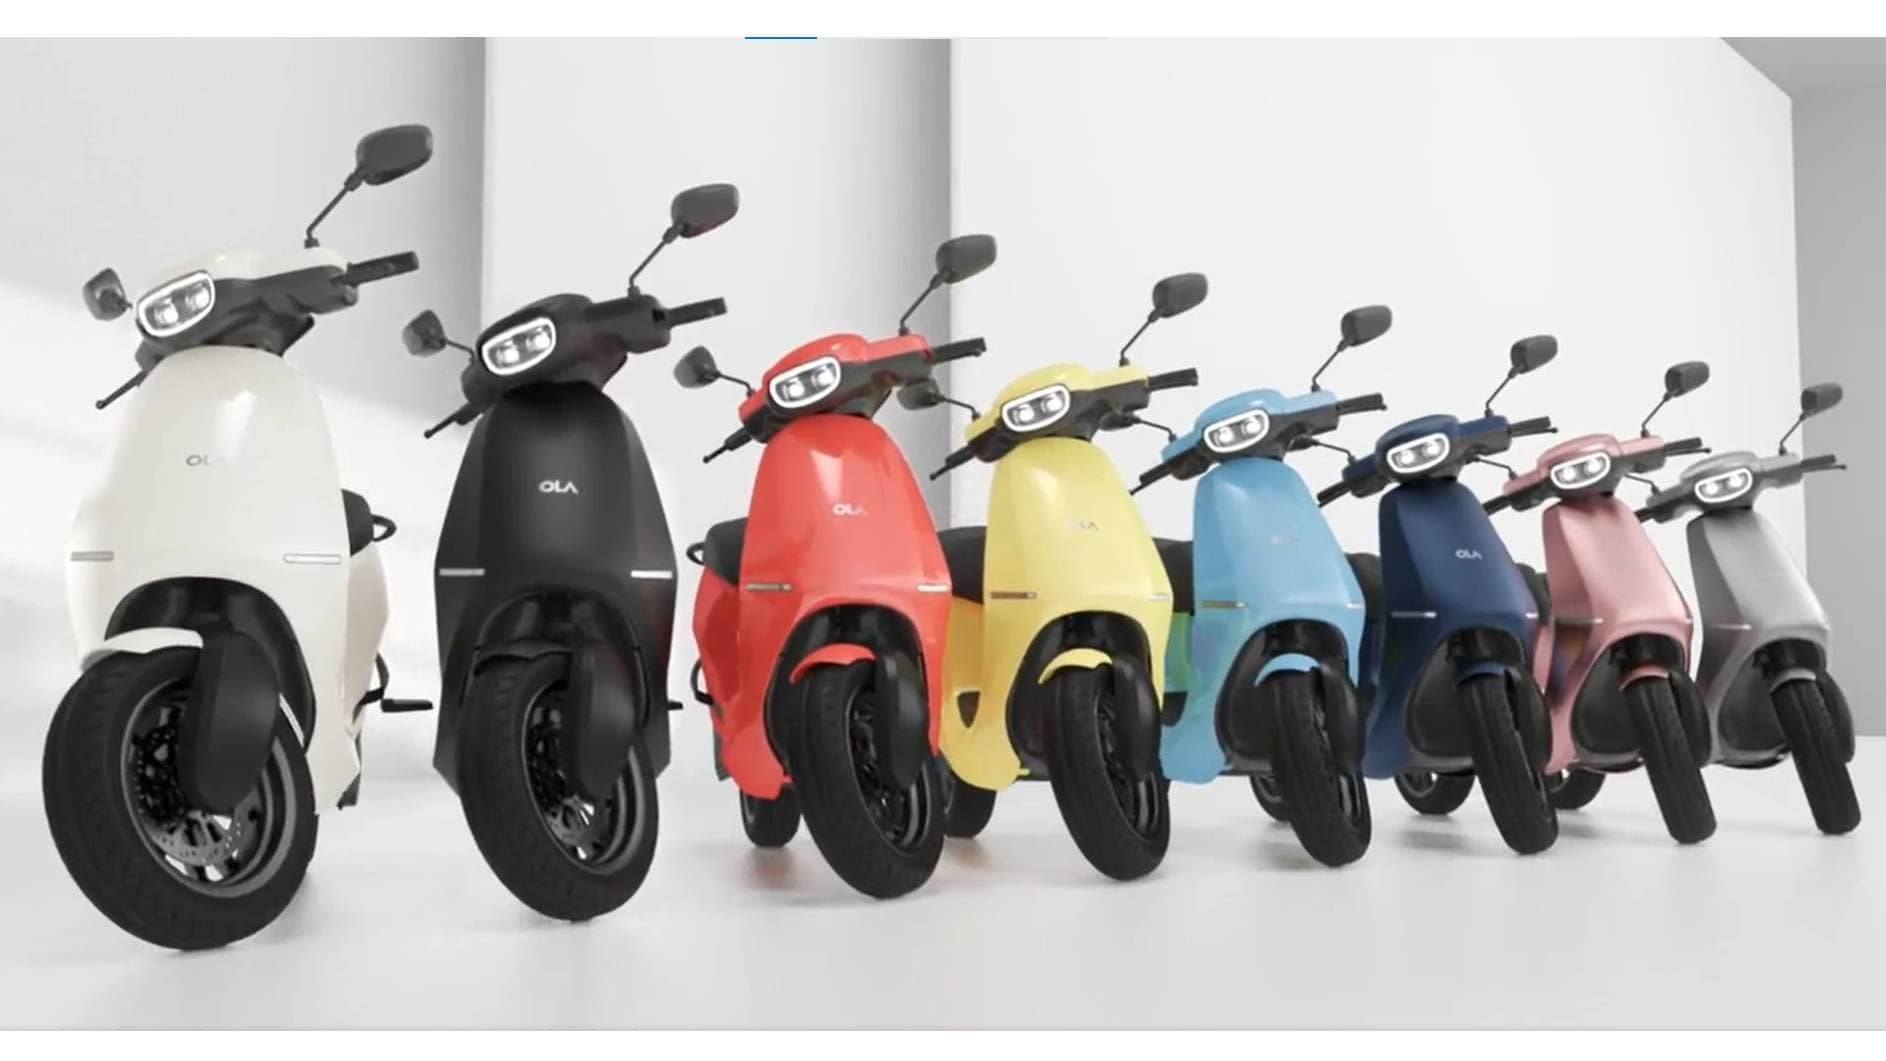 Eight of the ten colour options for the Ola Electric e-scooter have been revealed in a new video. Image: Ola Electric